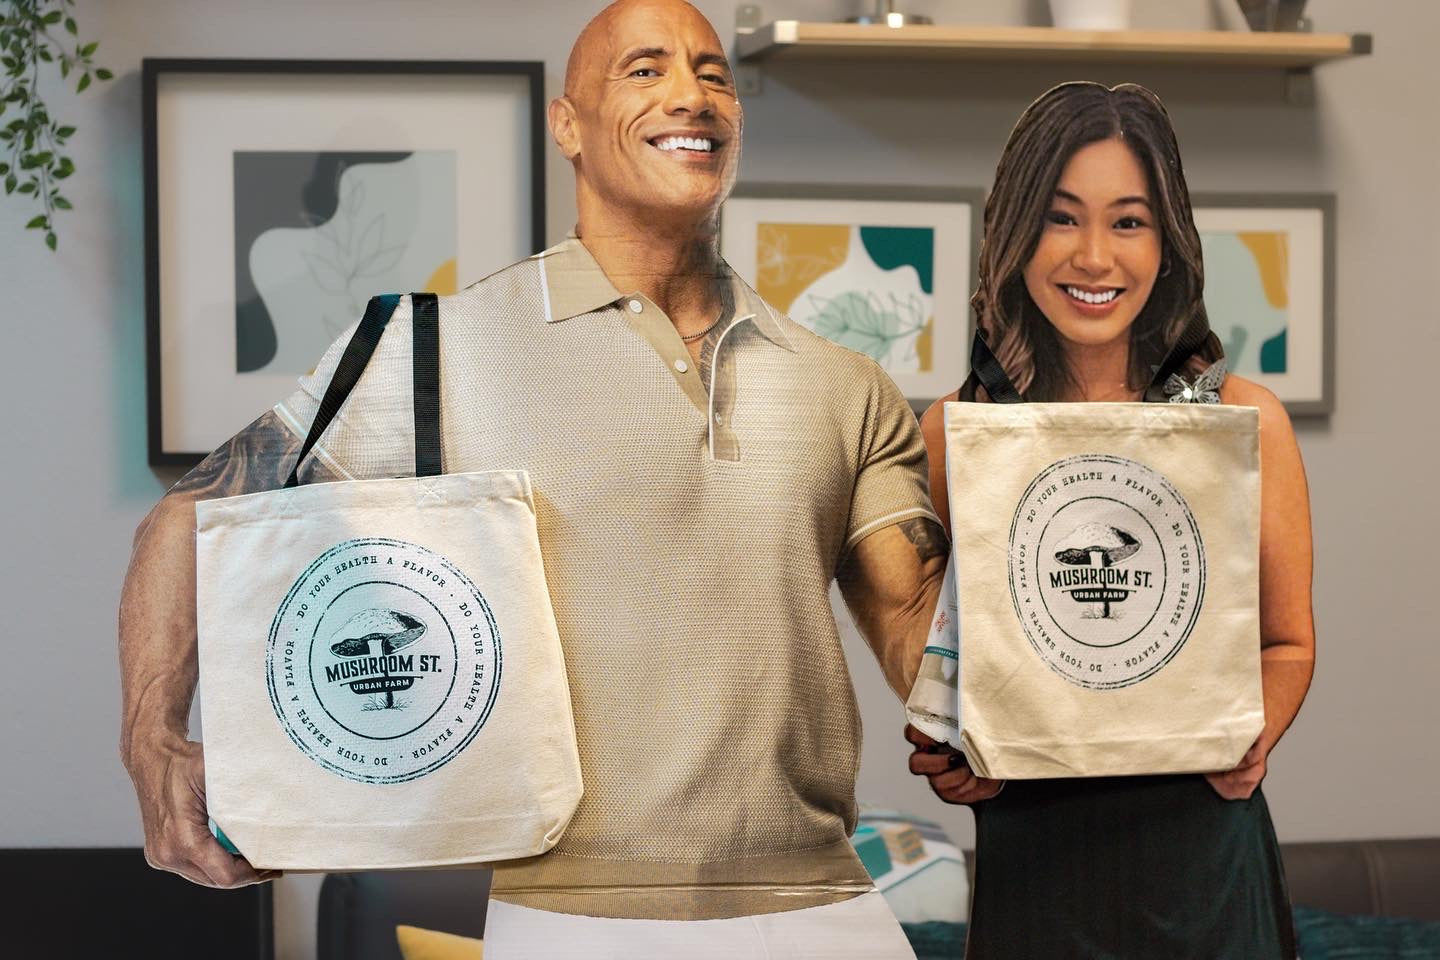 Dwayne "The Rock" Johnson cutout with Lyna's cutout holding Mushroom Street tote bags